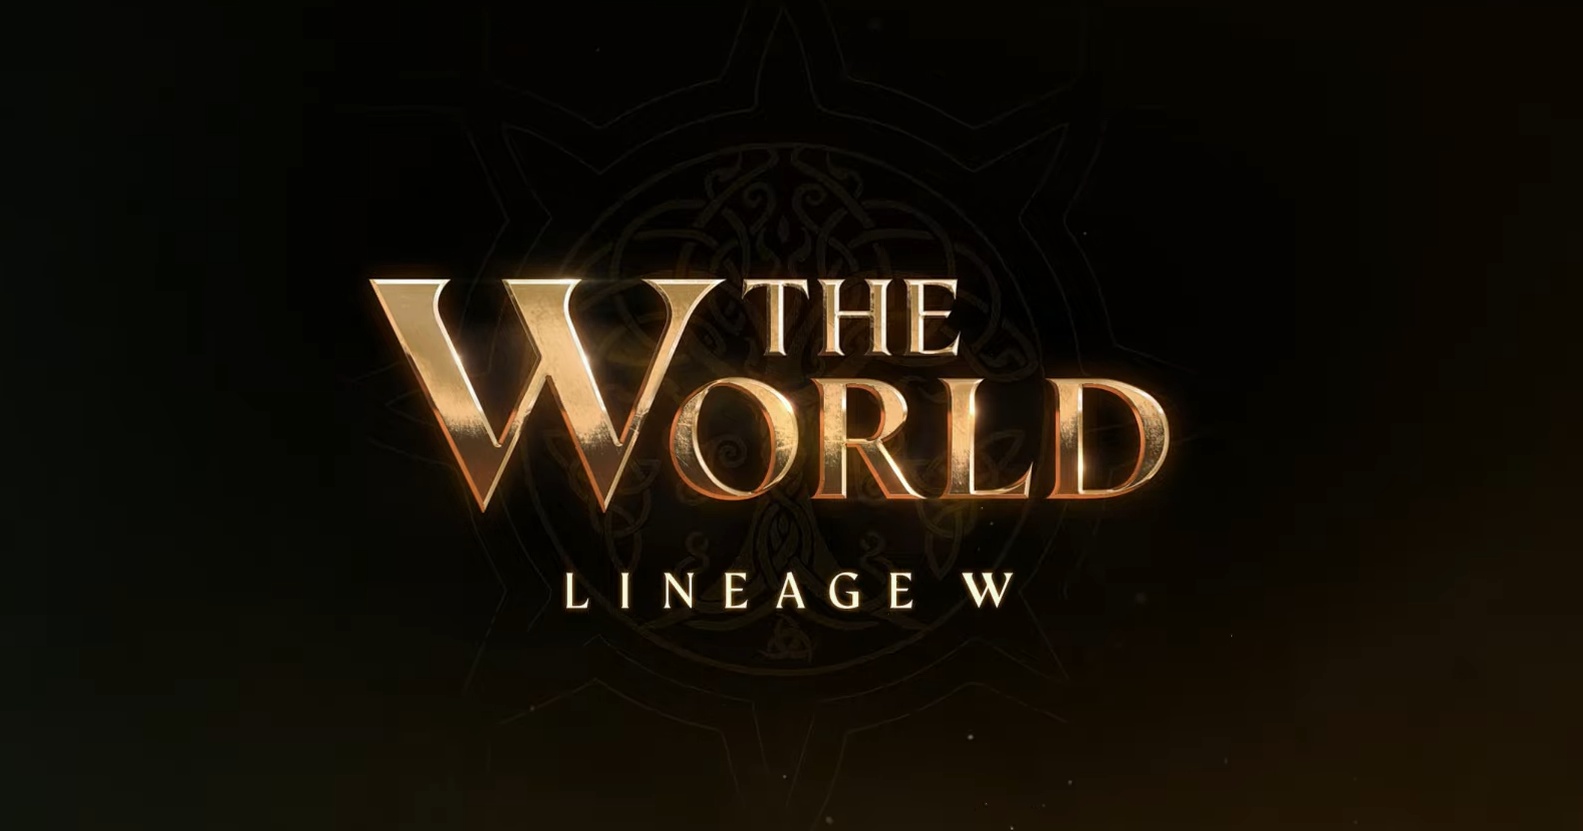 lineage w mode